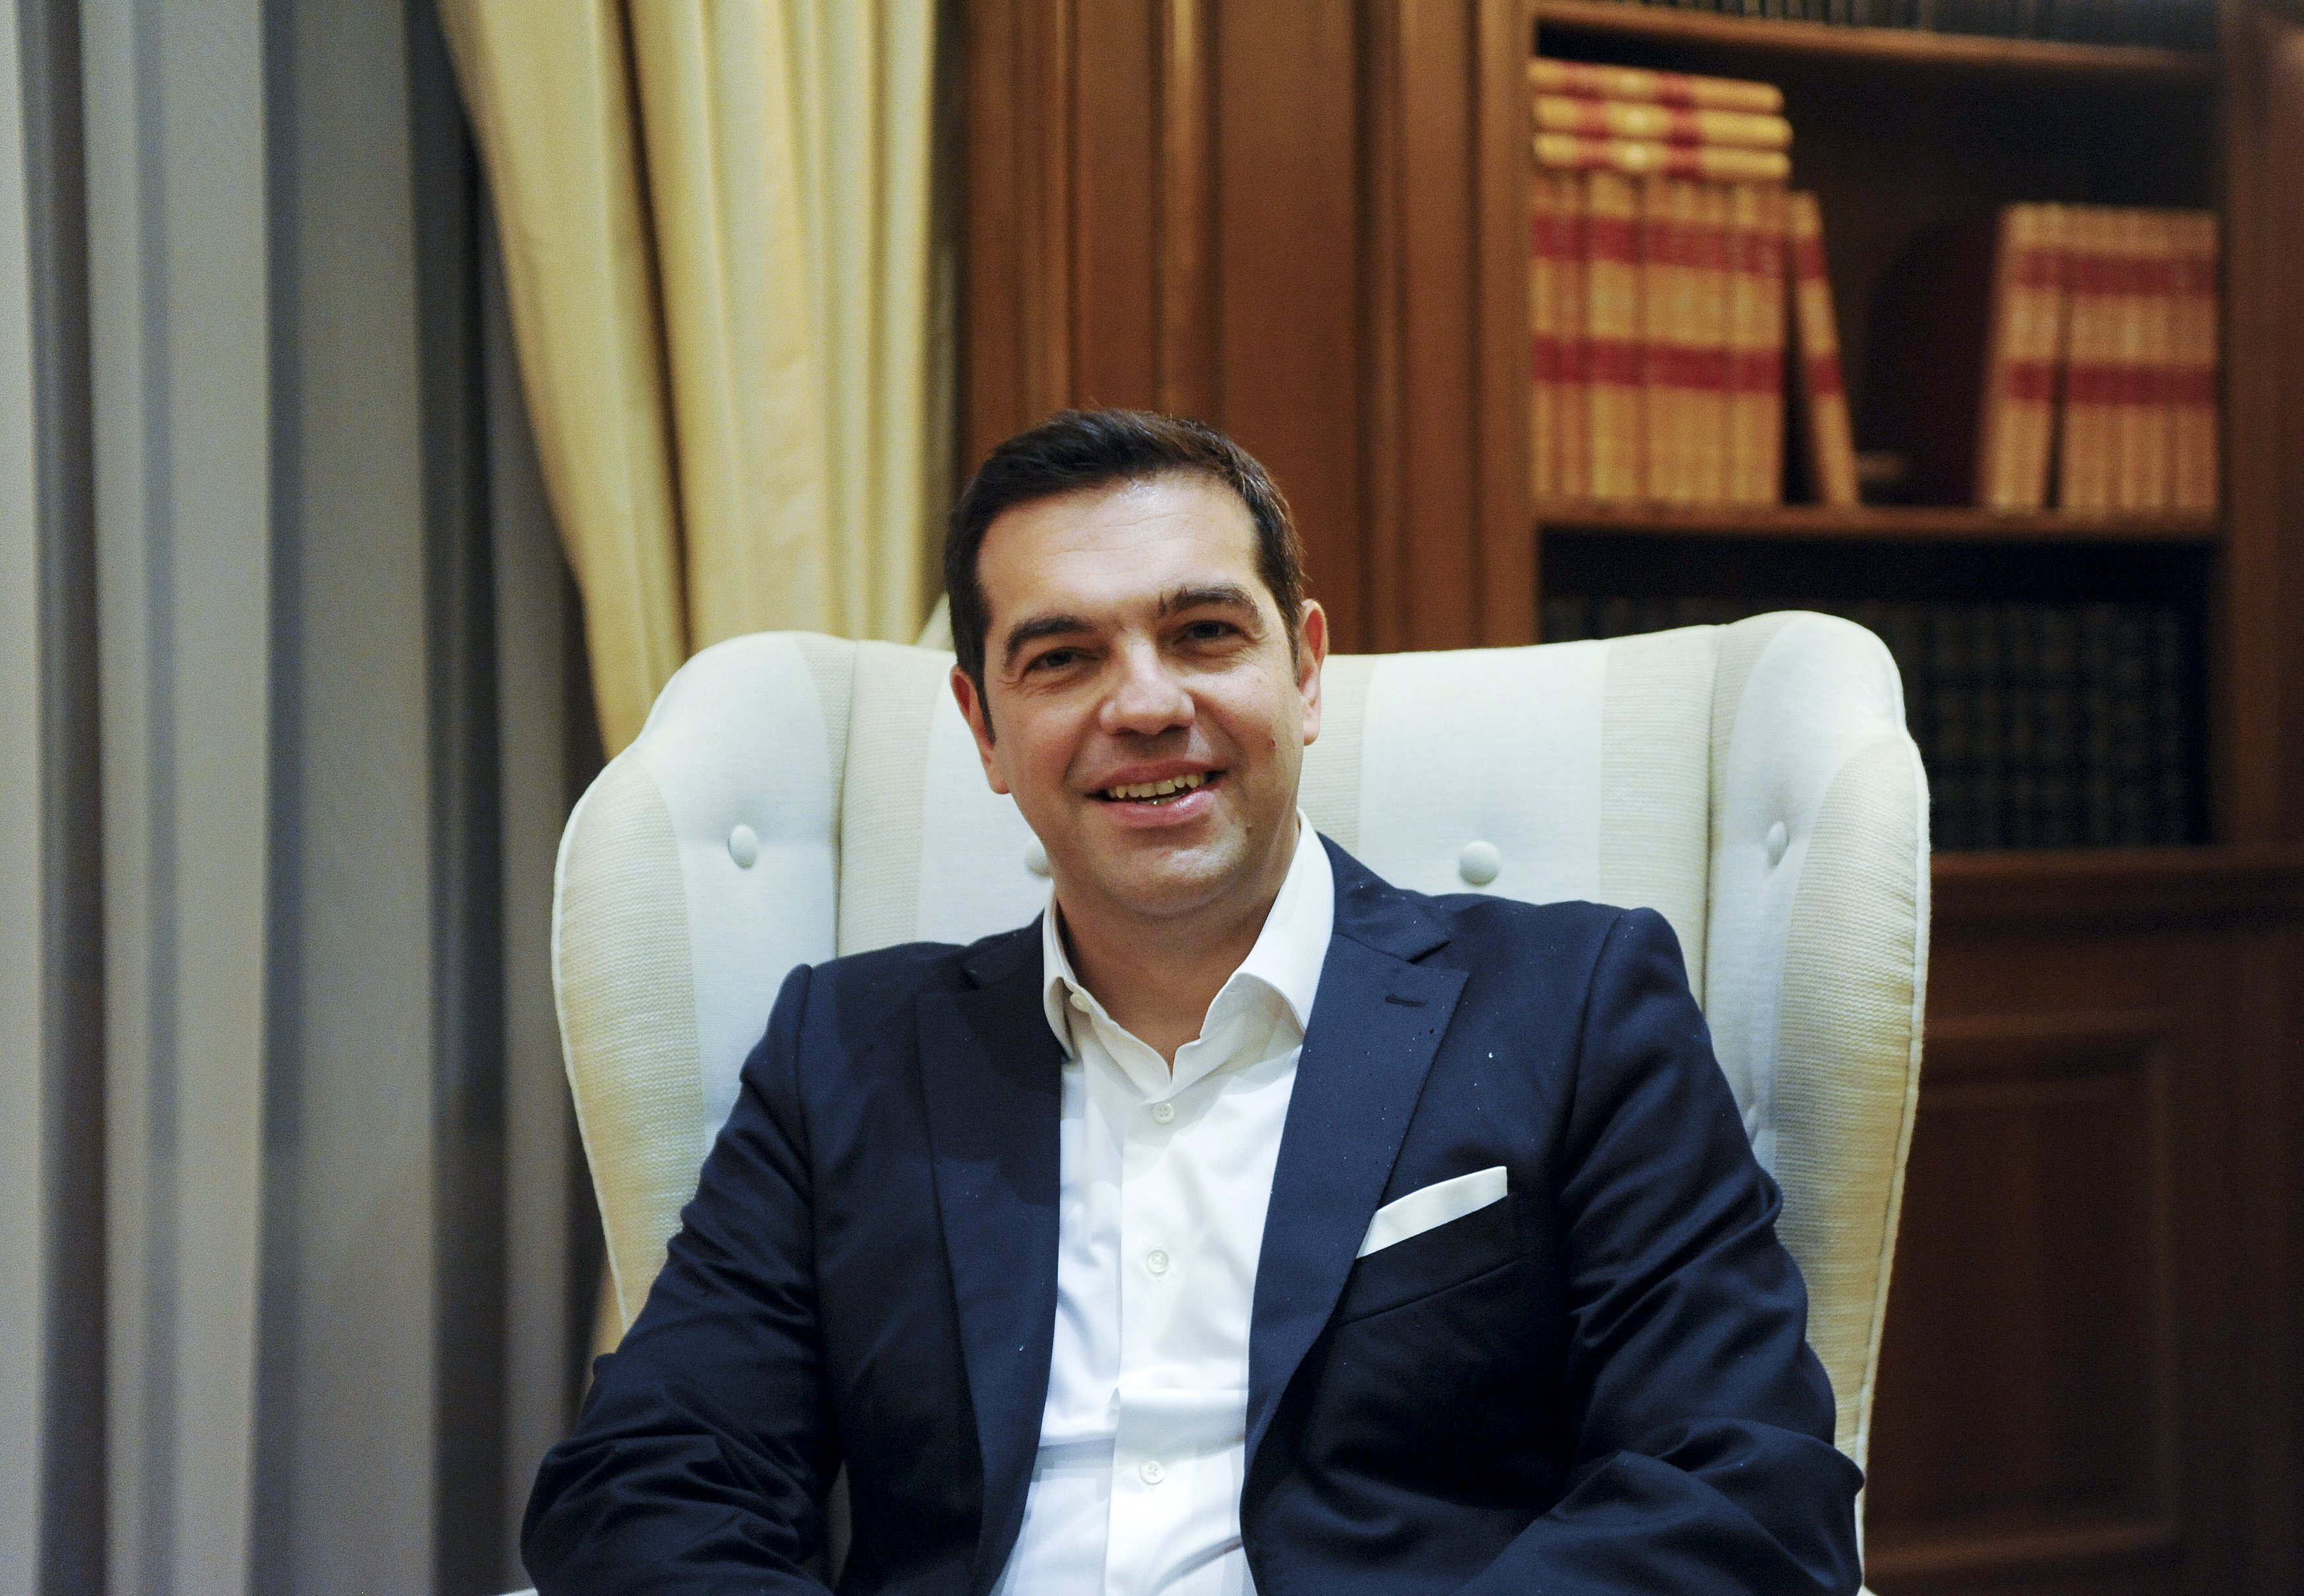 The appointments come after Tsipras led his party to victory in elections over the weekend.